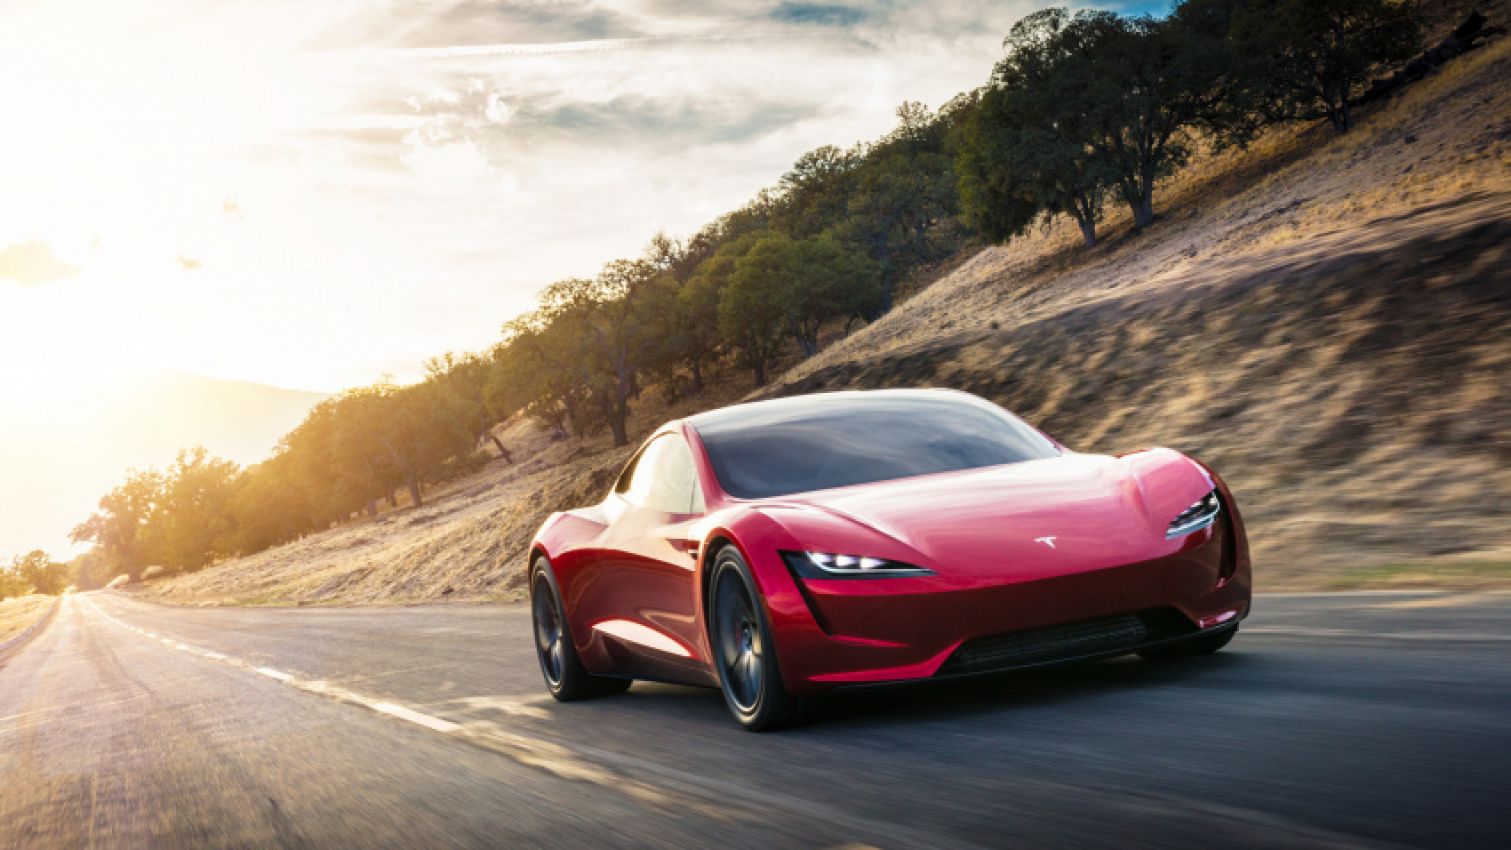 news, tesla, car tech, cars, tesla roadster 2022: price, release window, 0-60, range potential and more